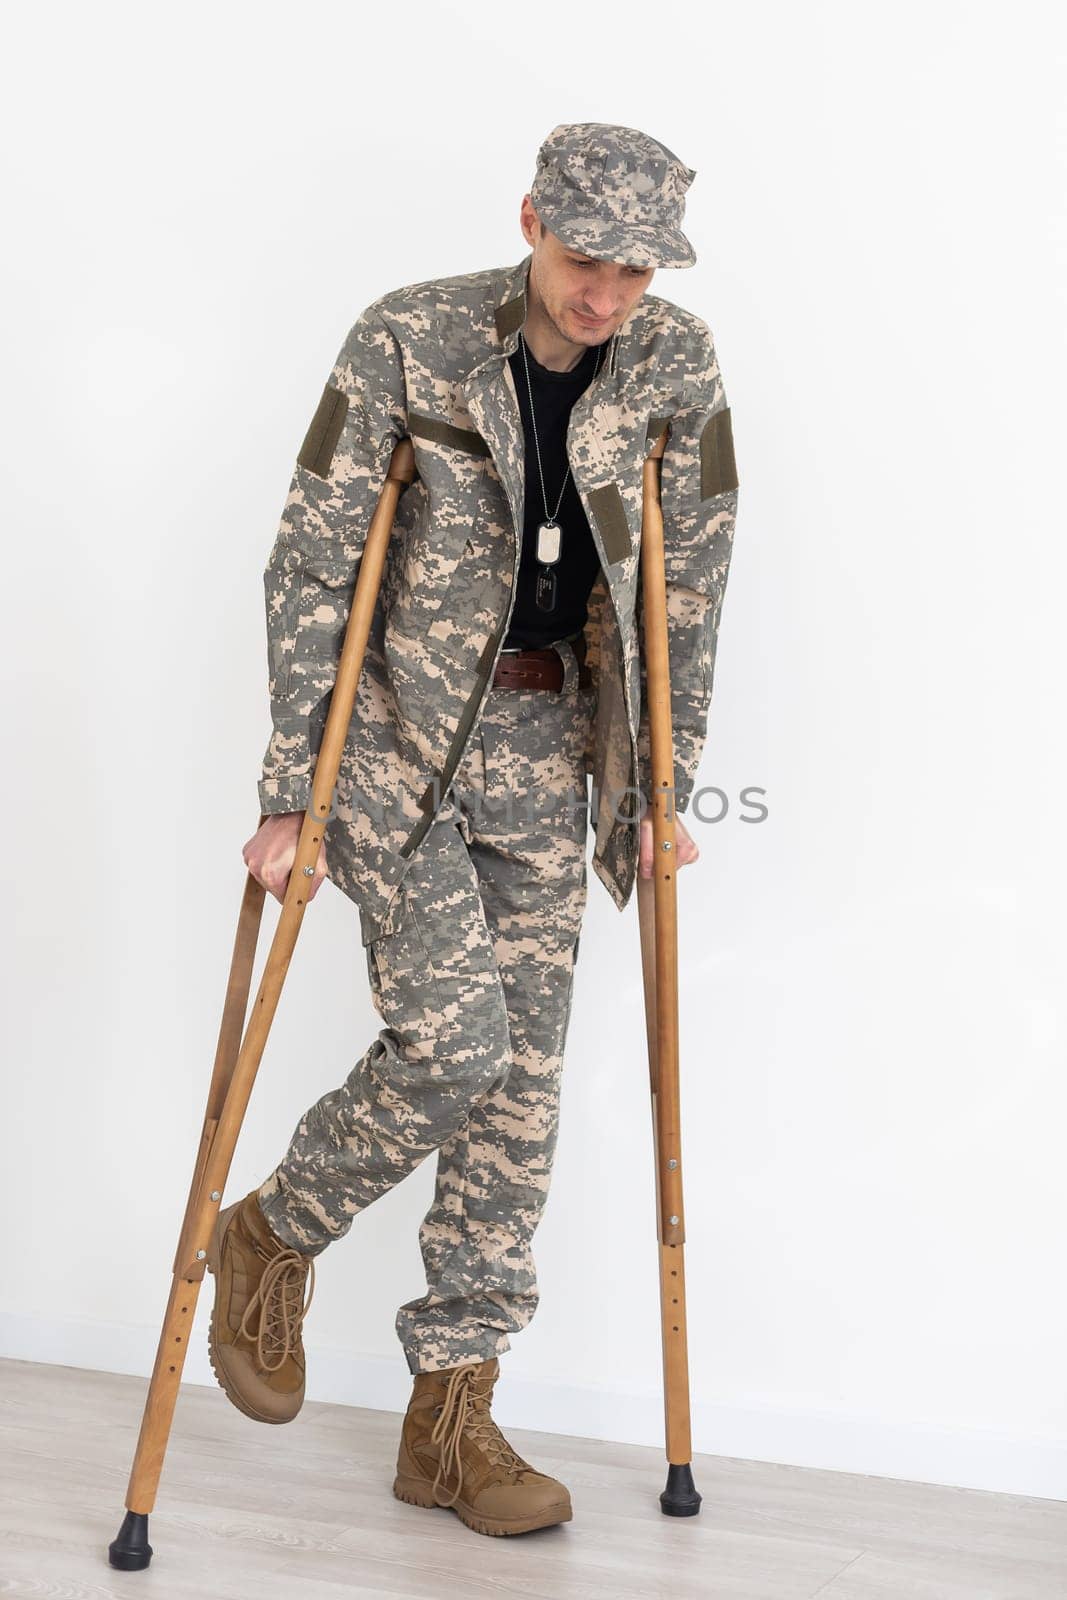 Portrait of soldier with crutches against white background by Andelov13